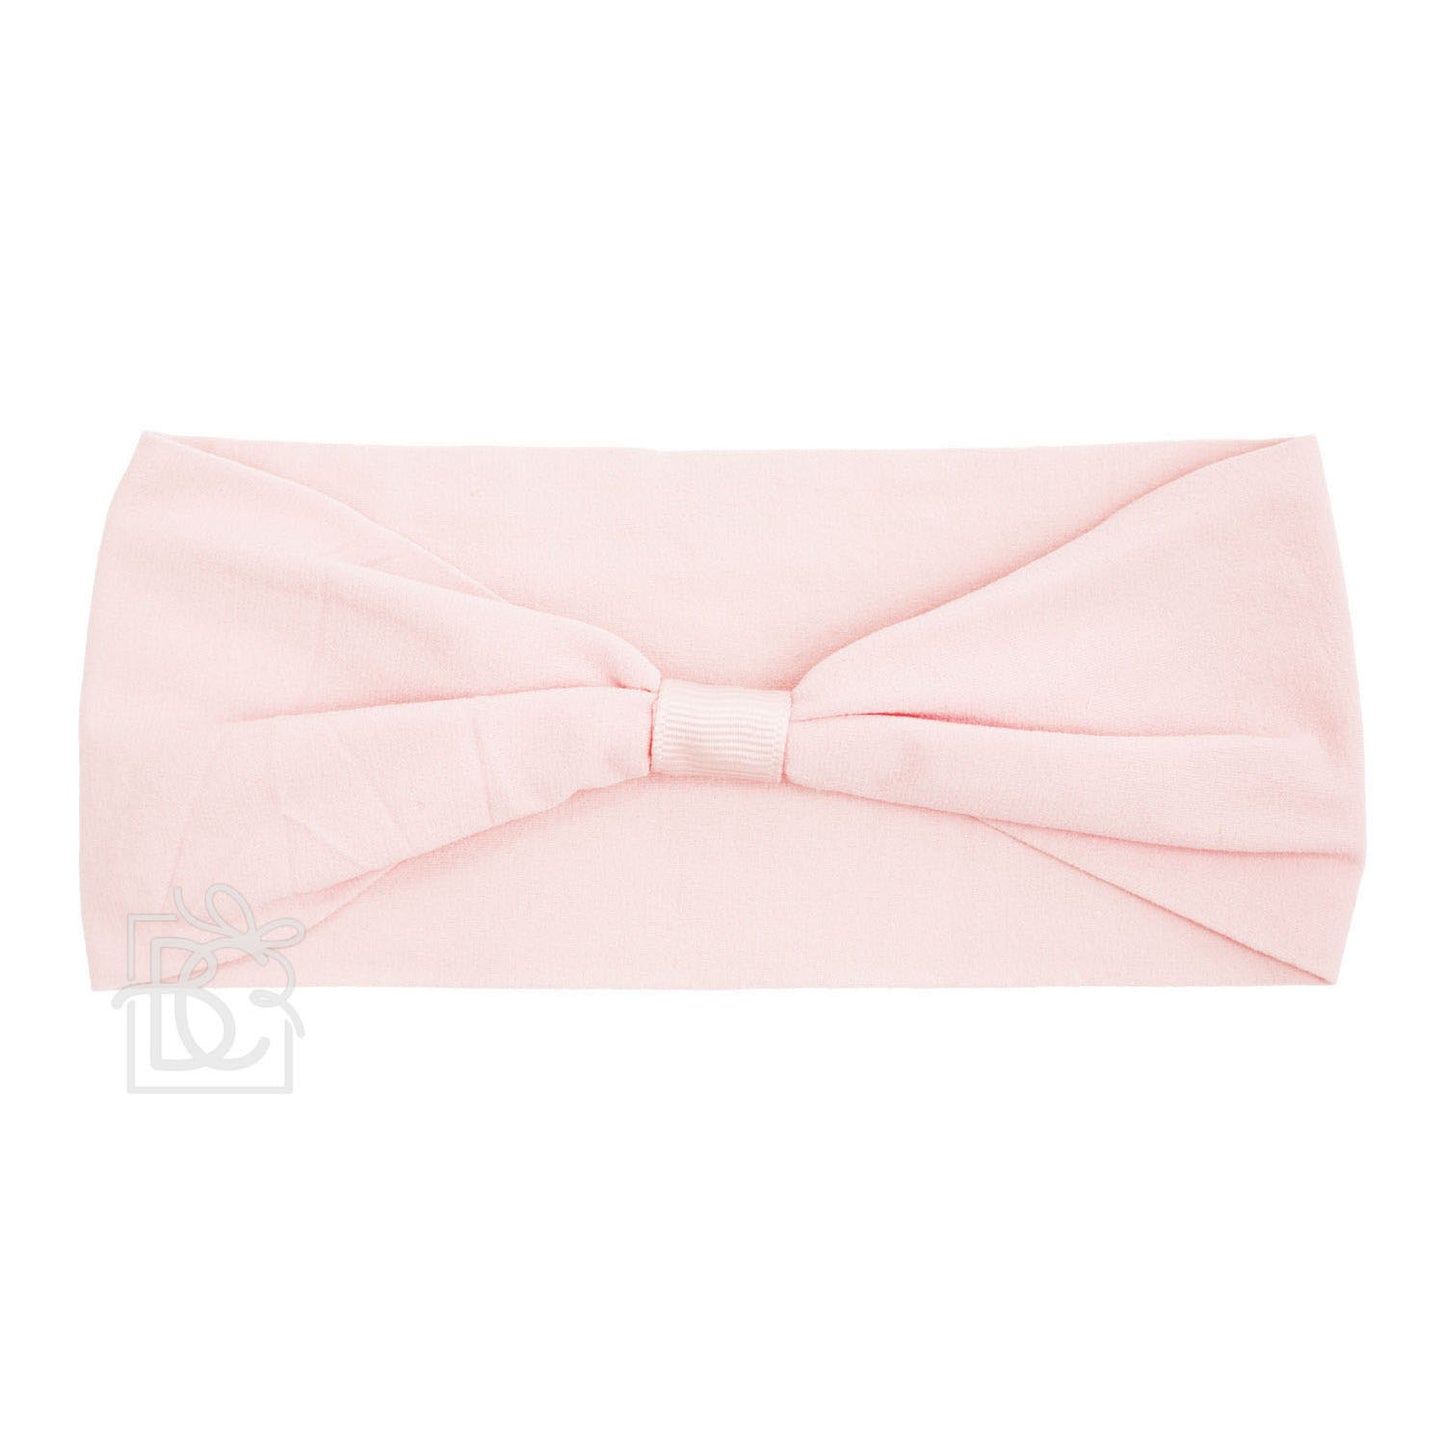 Add a Bow Headband in Light Pink  - Doodlebug's Children's Boutique